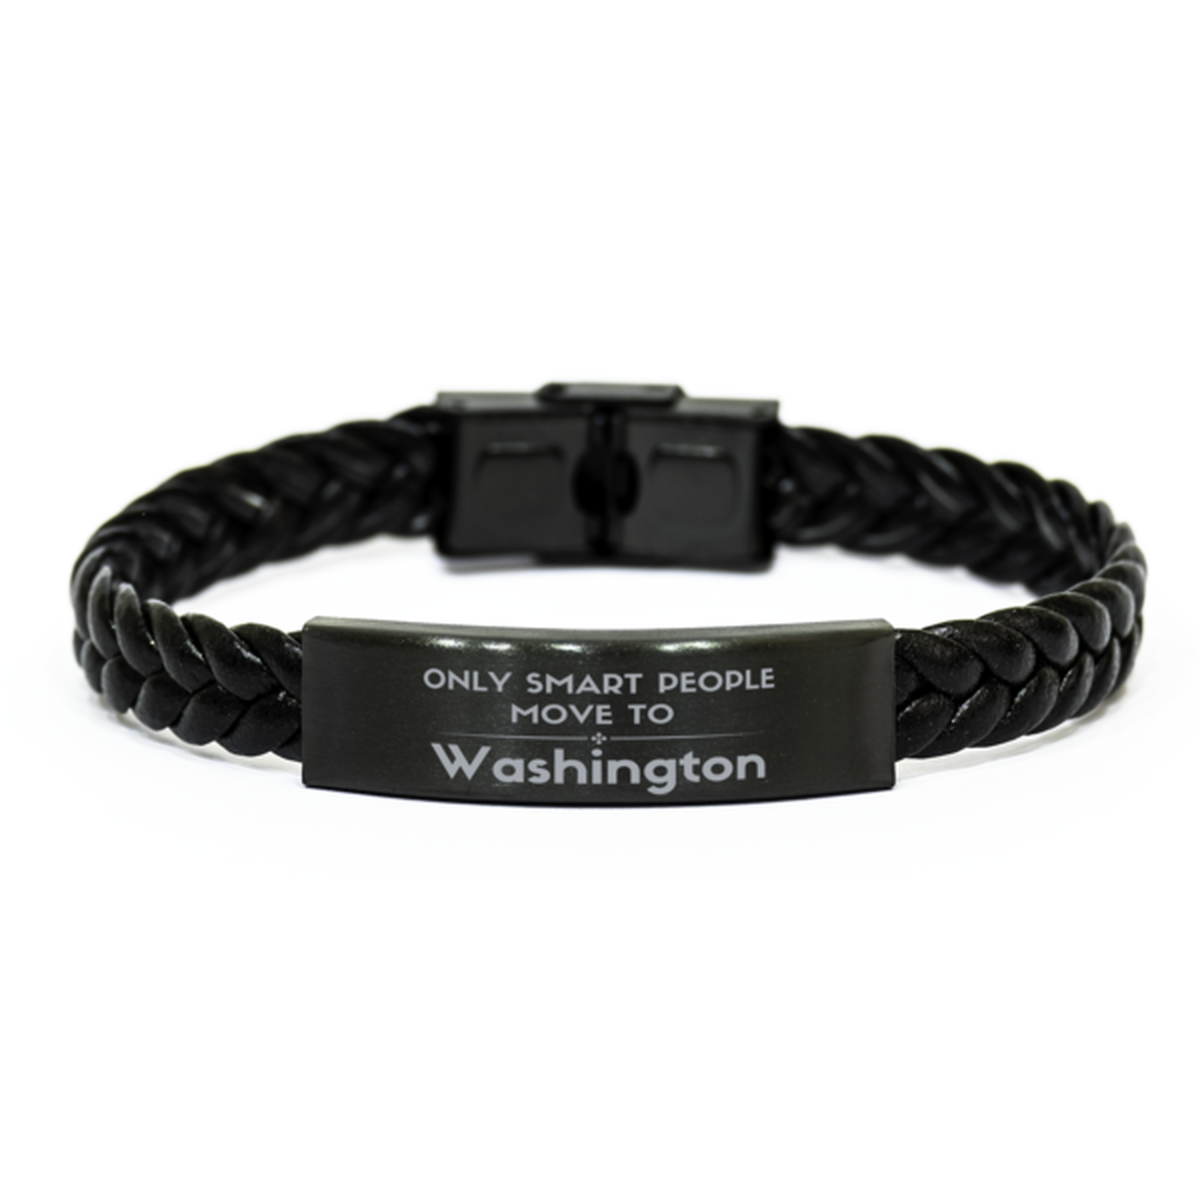 Only smart people move to Washington Braided Leather Bracelet, Gag Gifts For Washington, Move to Washington Gifts for Friends Coworker Funny Saying Quote